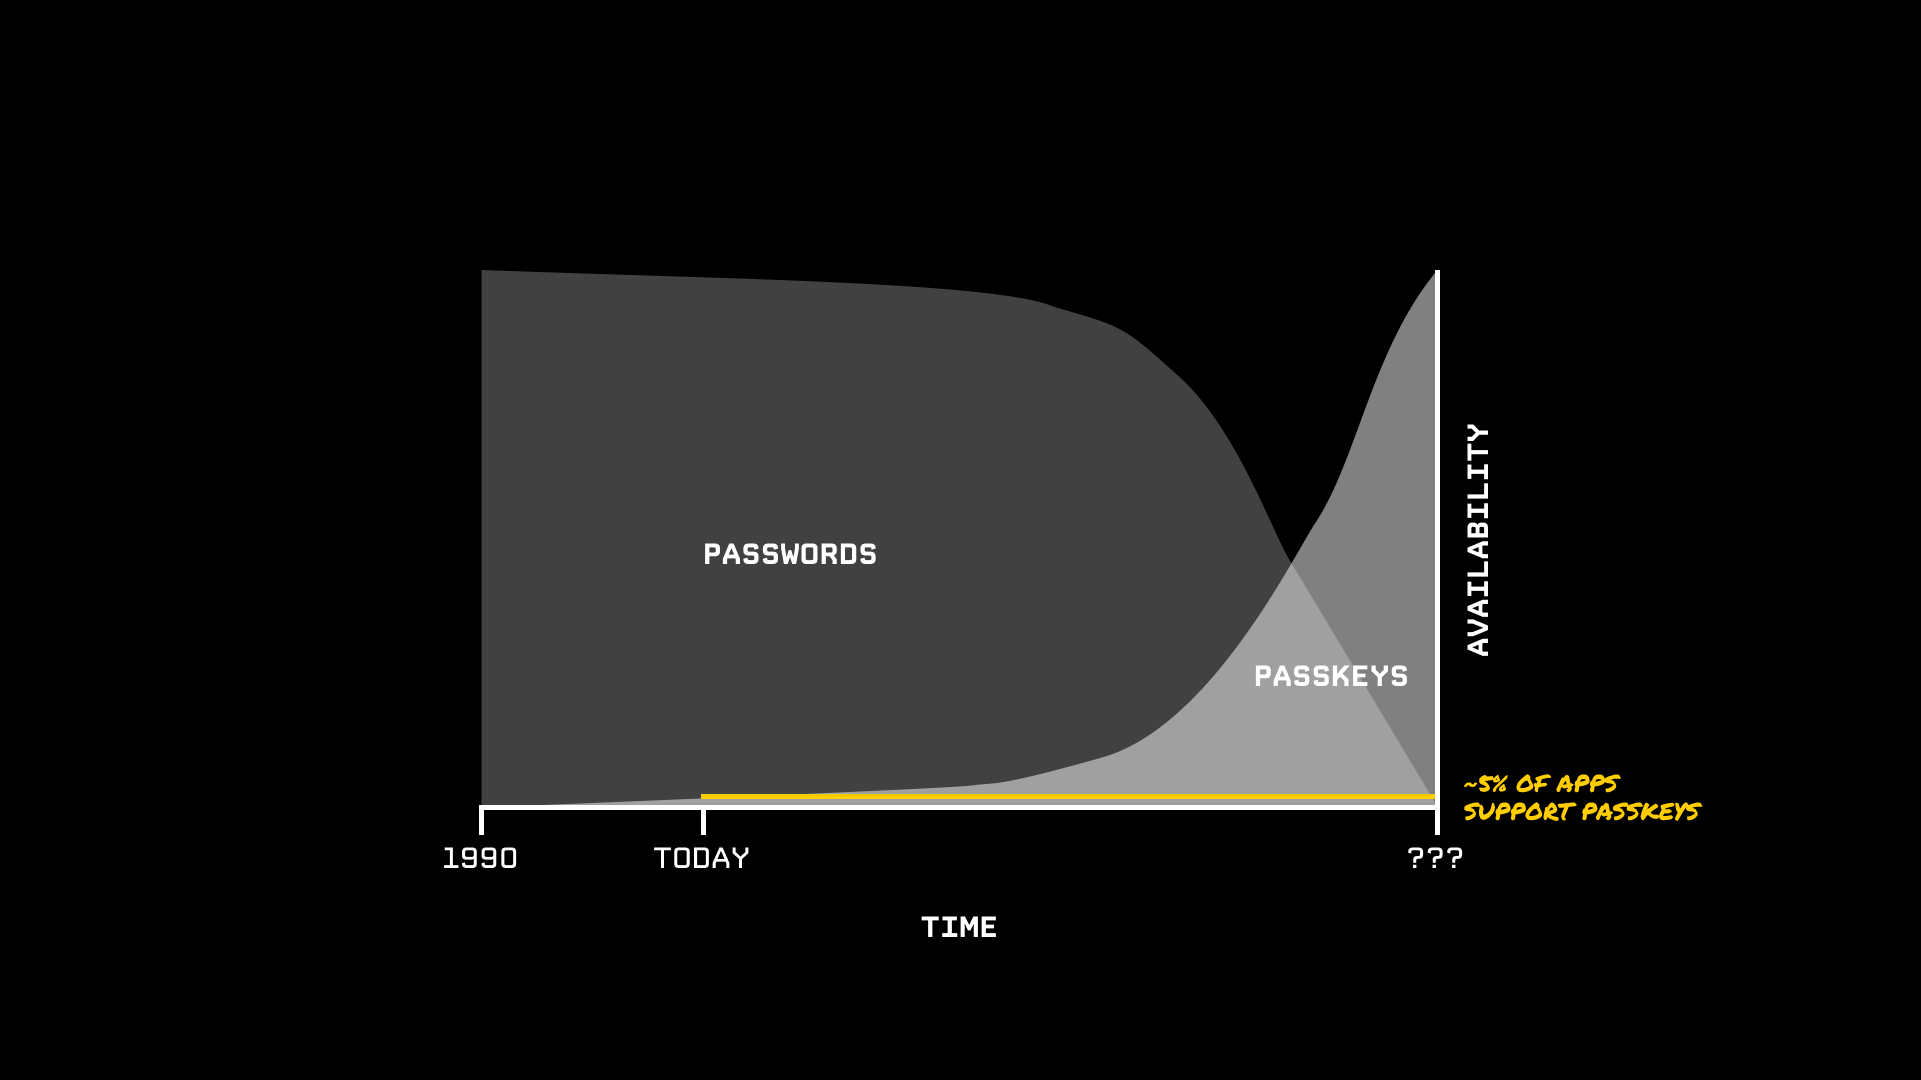 Graph of approximately 5% support for passkeys today.